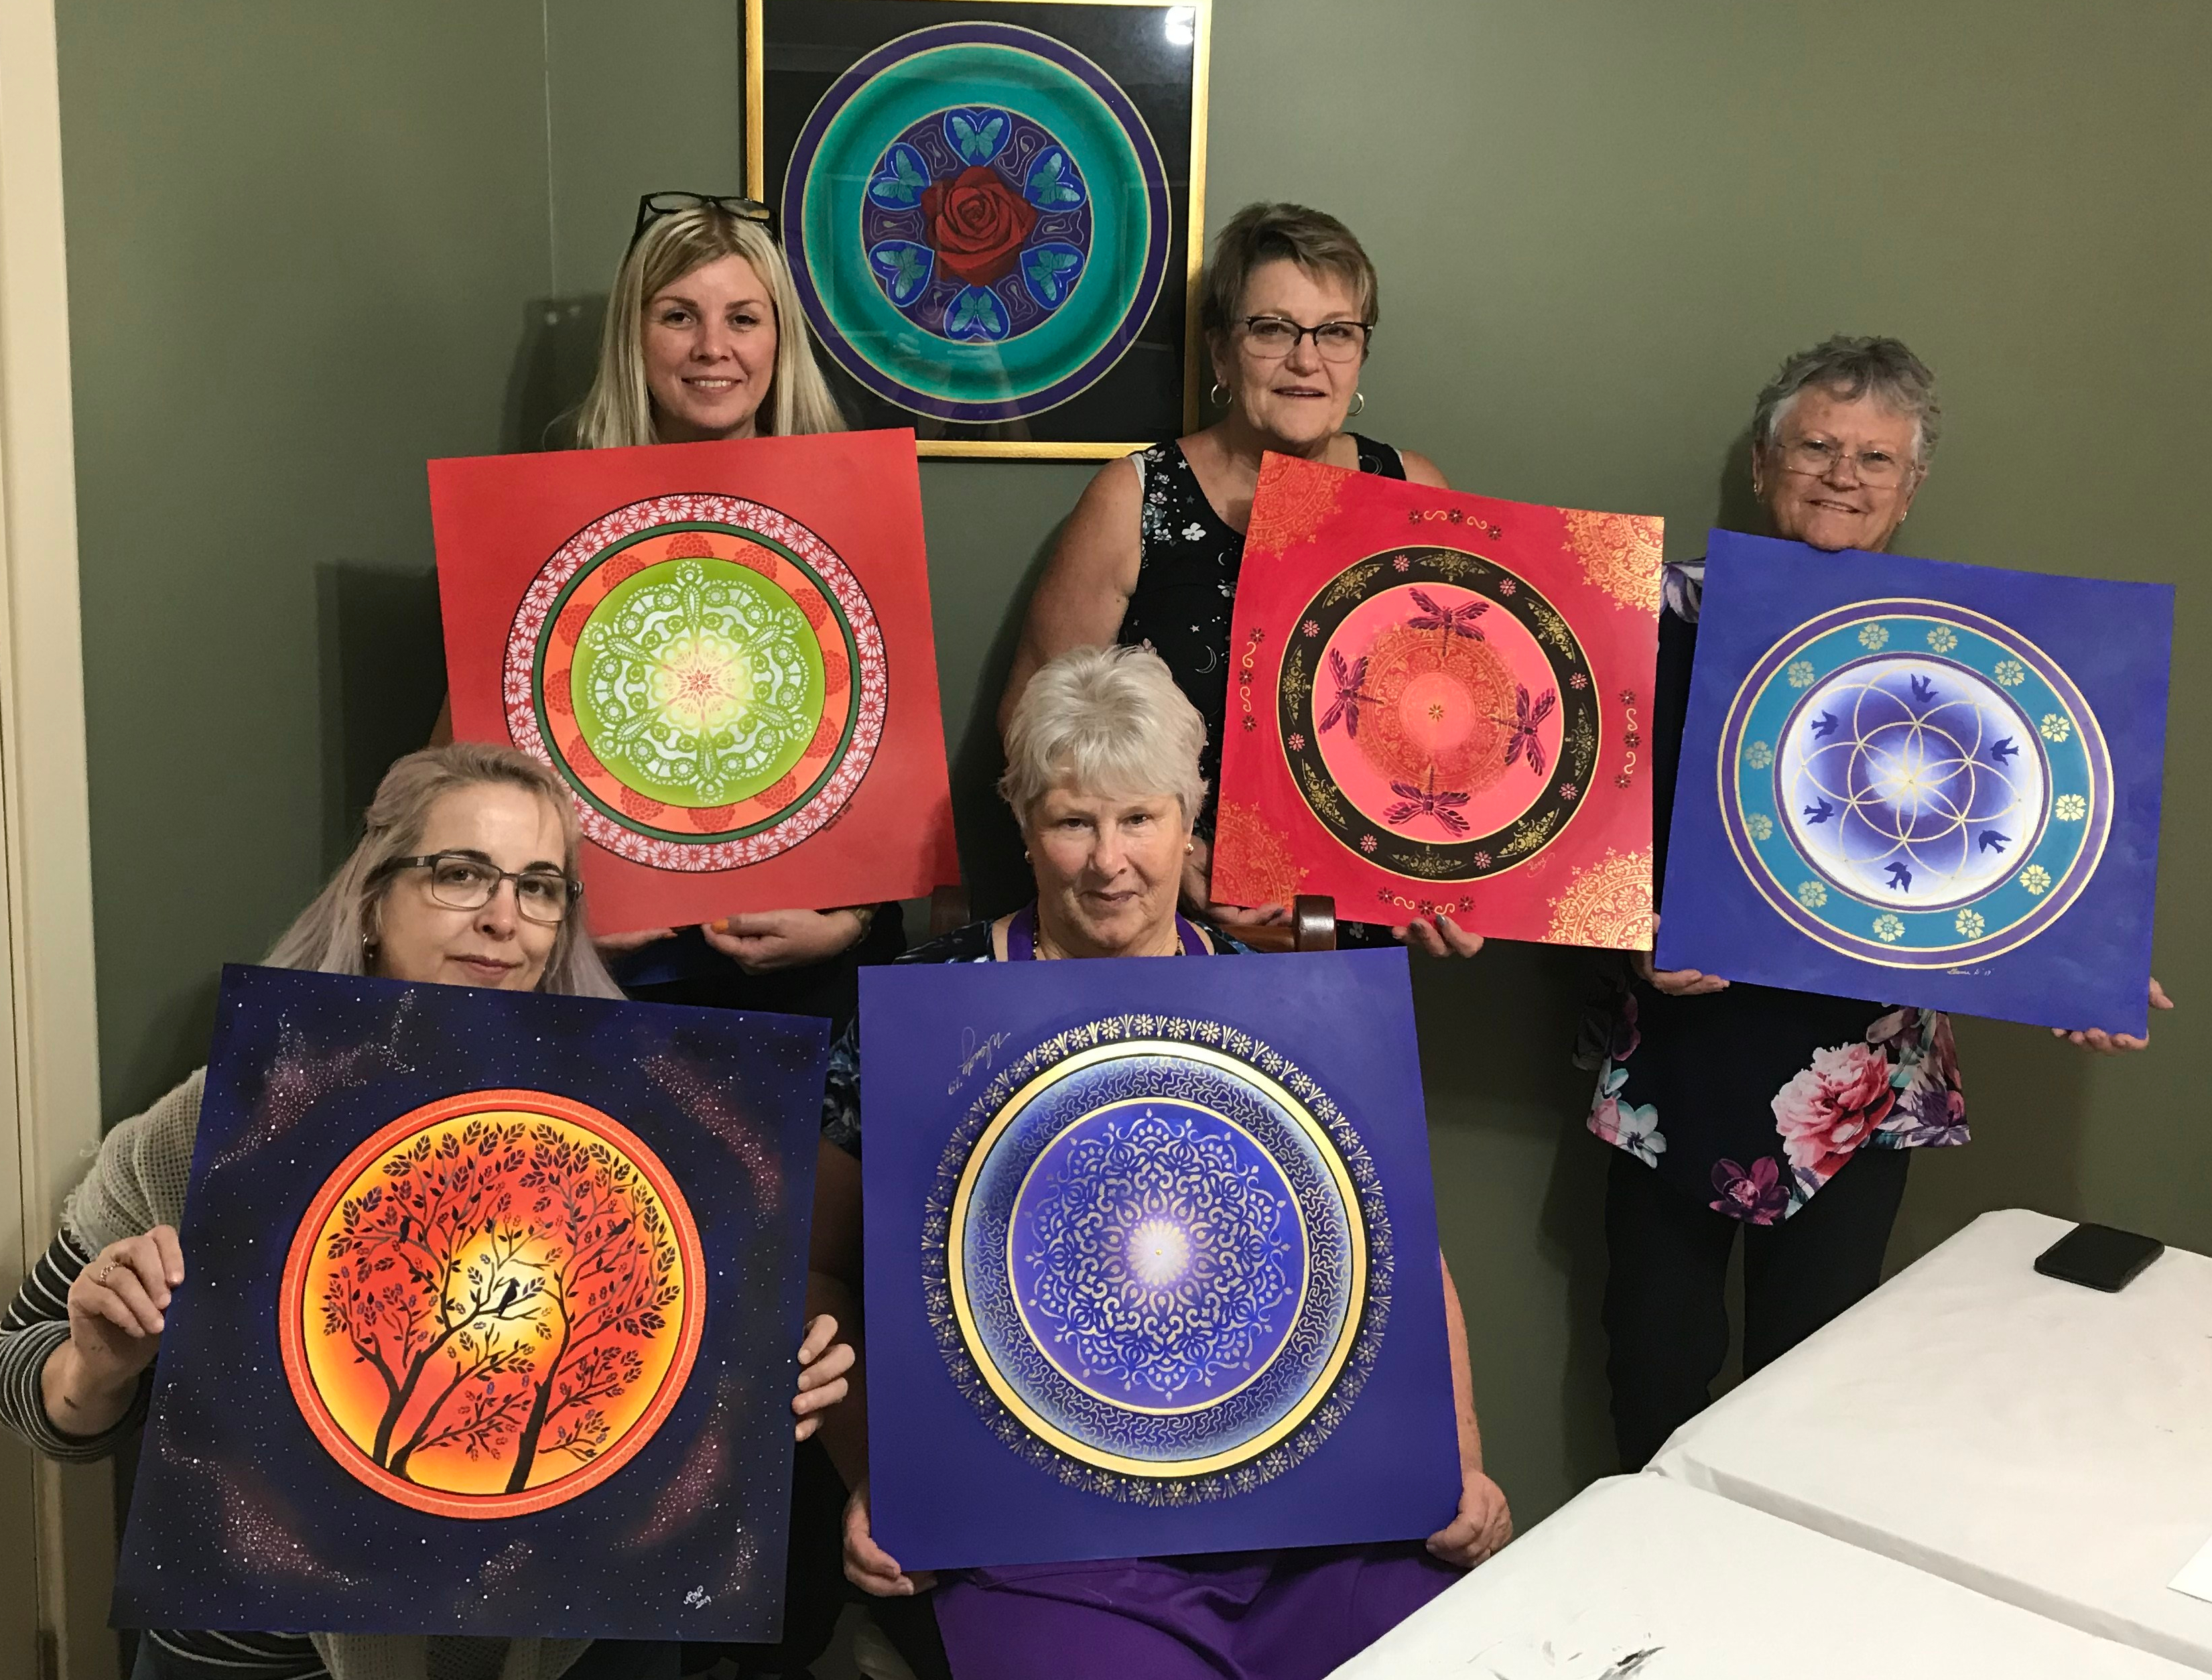 Group Acrylic Mandala Painting Intuitive Art Therapy Workshop with Embarked with Simone in Atwell, South of Perth Western Australia